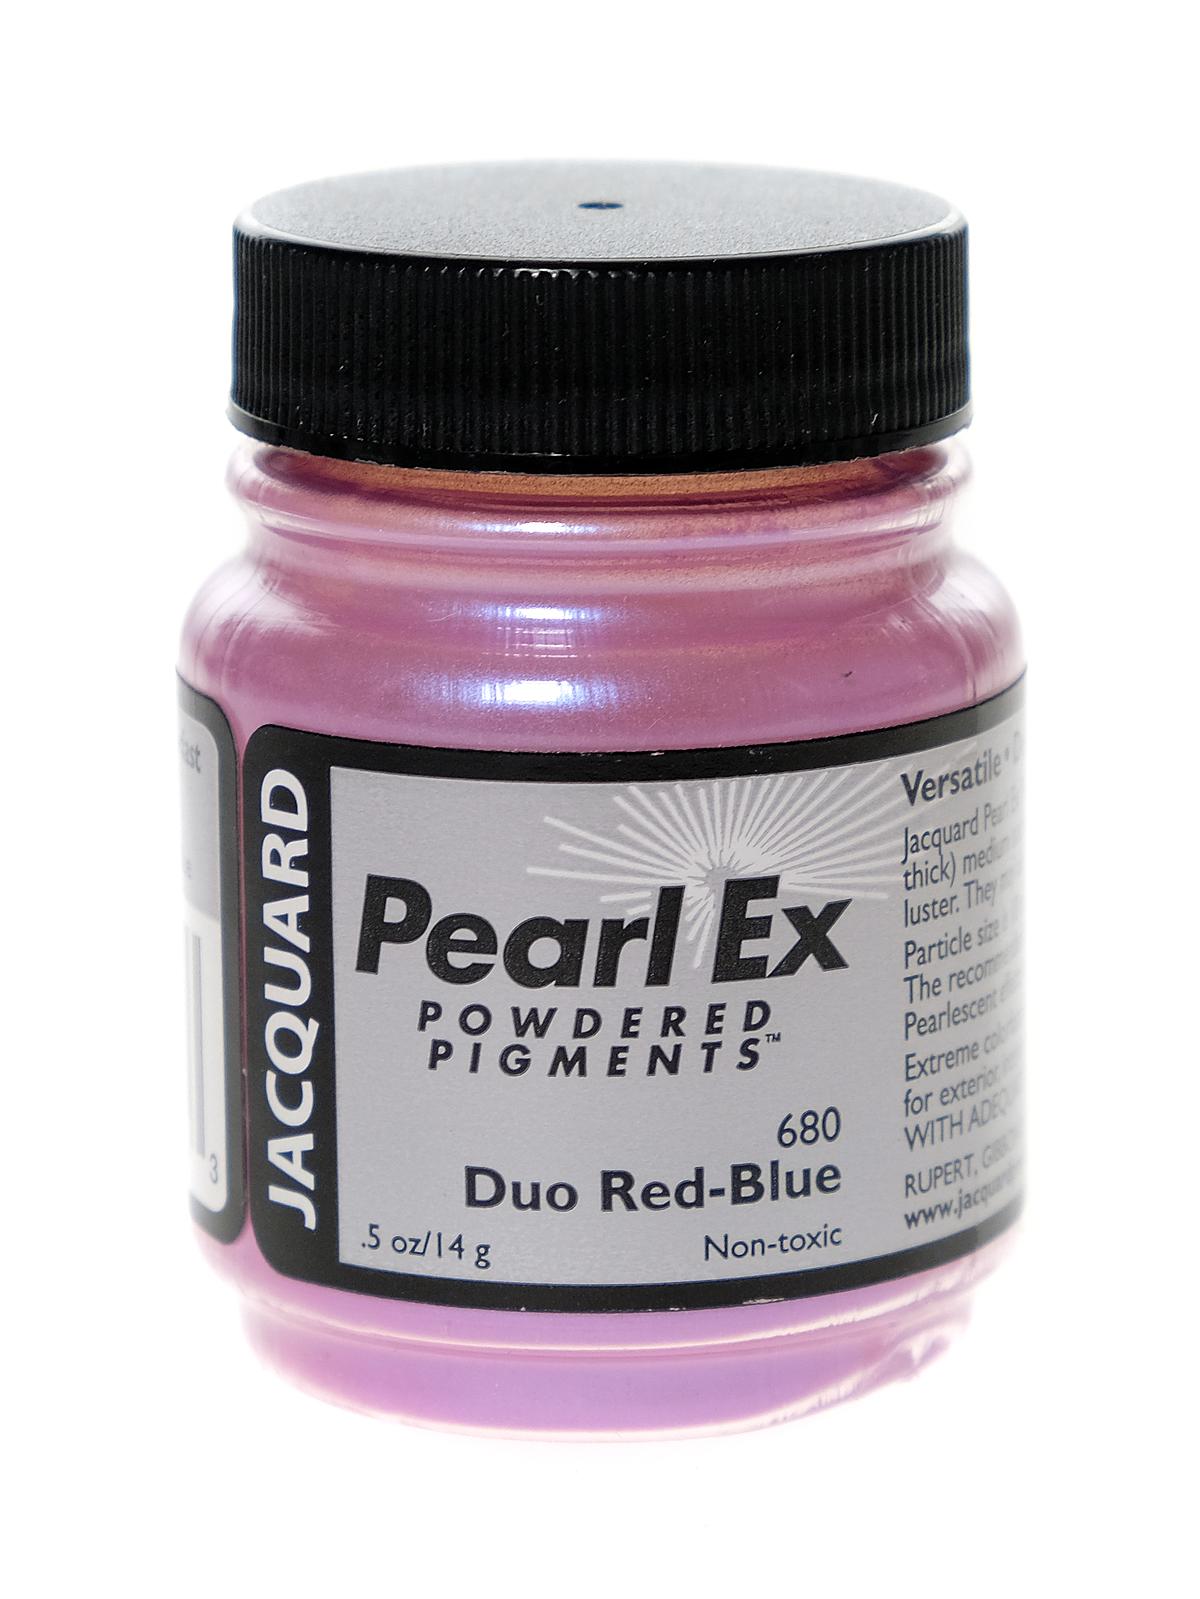 Pearl Ex Powdered Pigments Duo Red-blue 0.50 Oz.